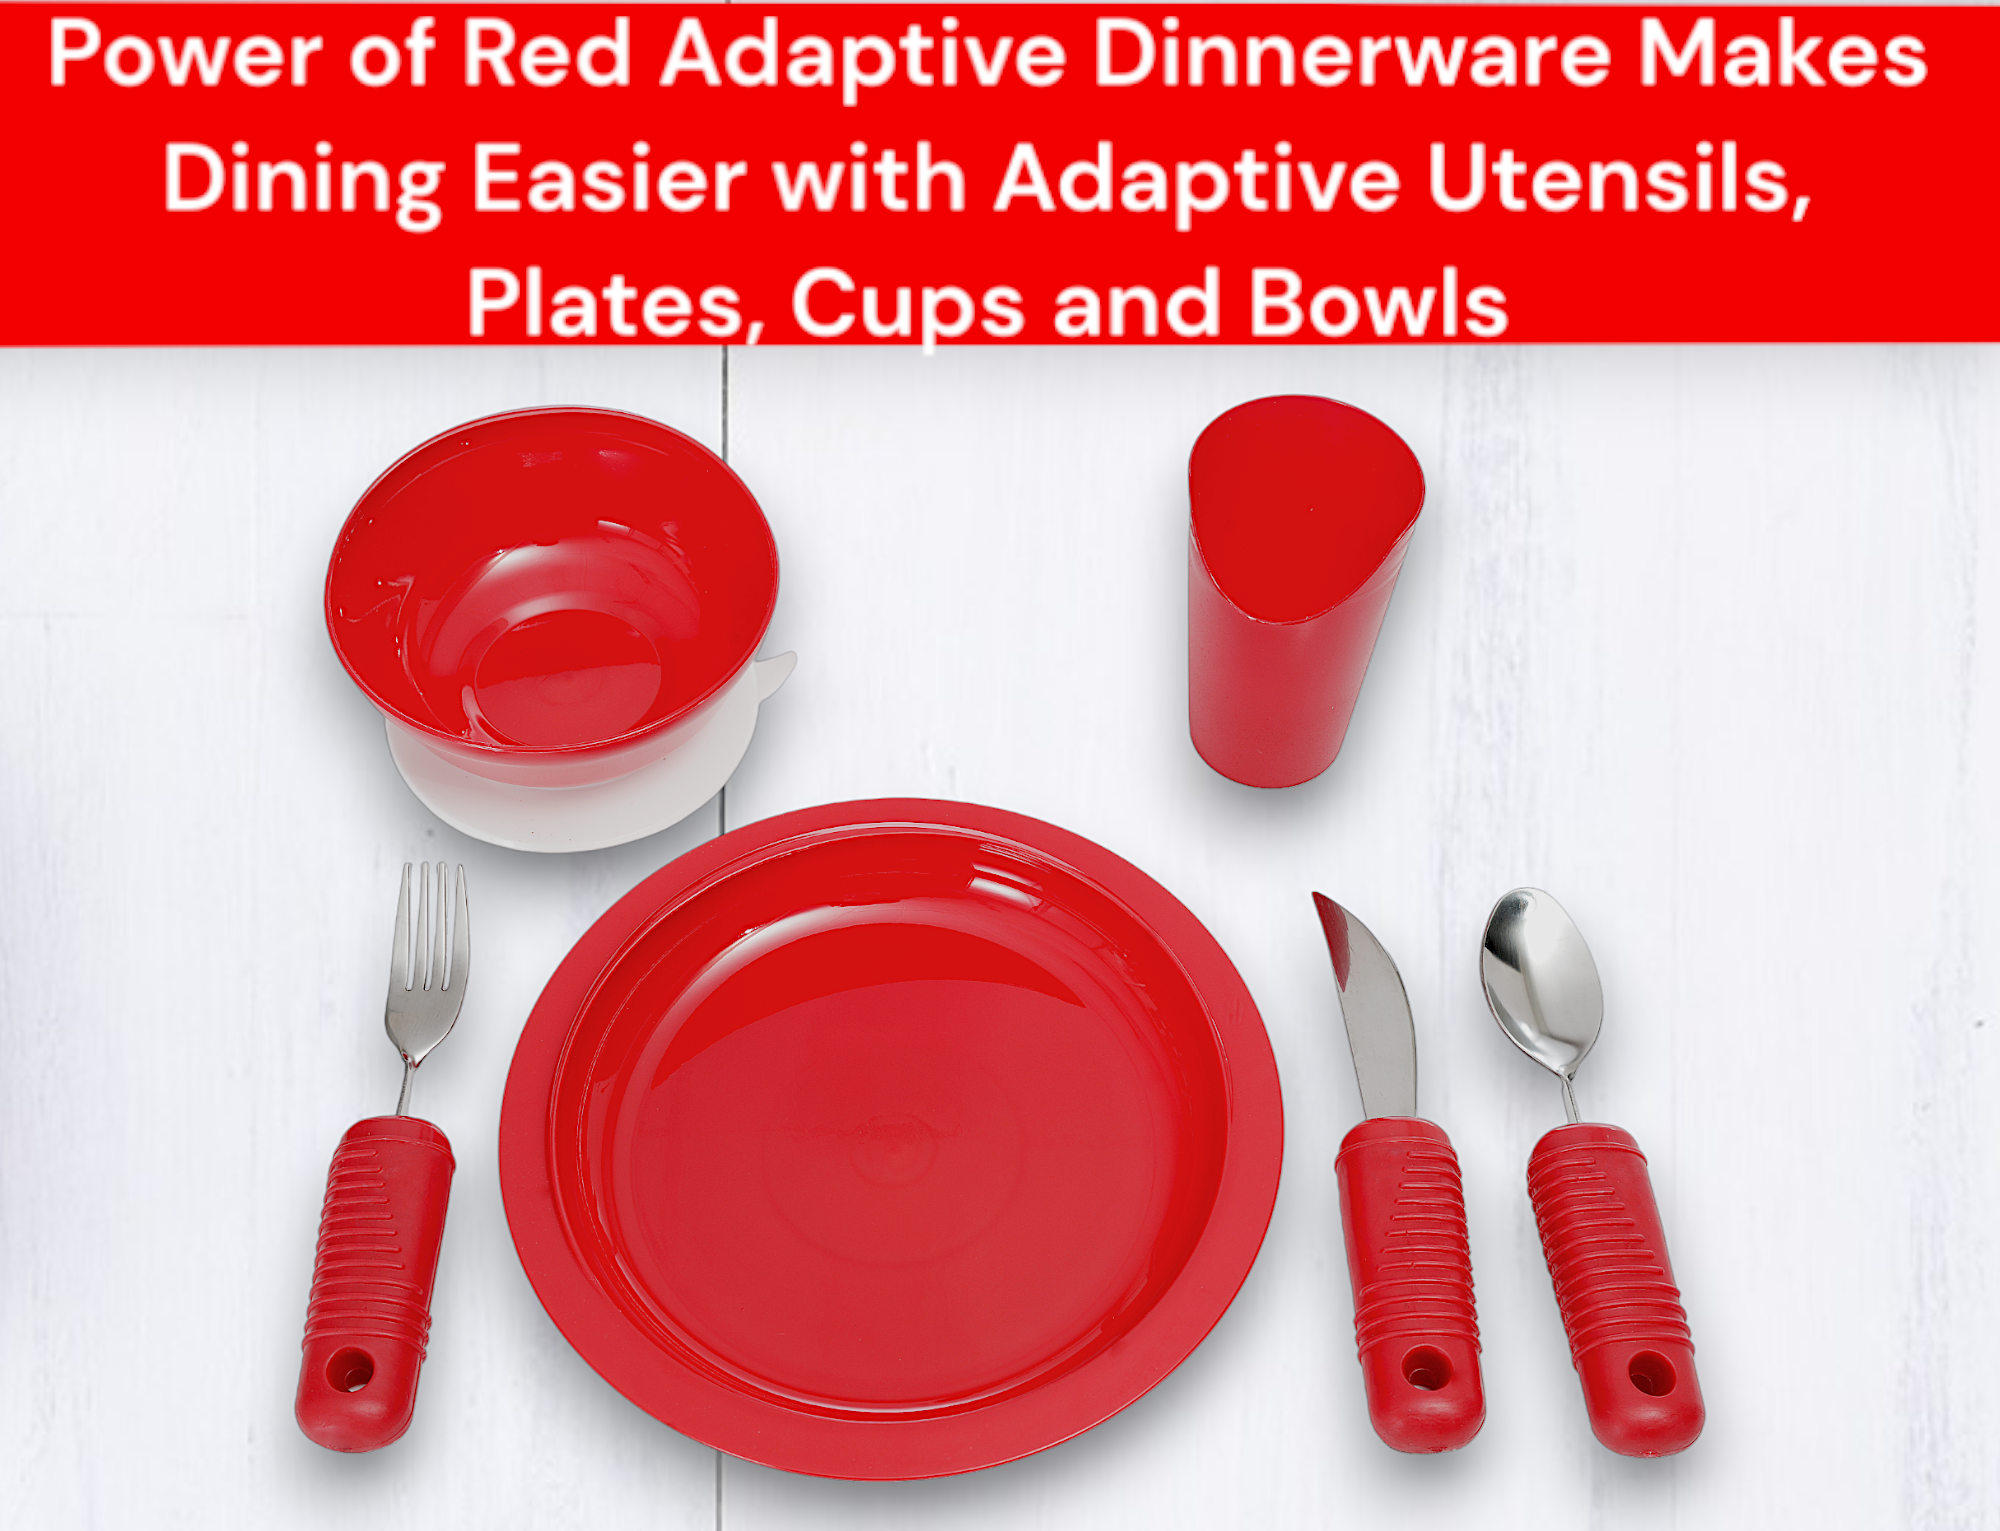 Essential Medical Supply Power of Red Complete Adaptive Dinnerware Setting for Alzheimer's and Dementia with Plate, Bowl, Cup, and Utensil Set - image 3 of 7